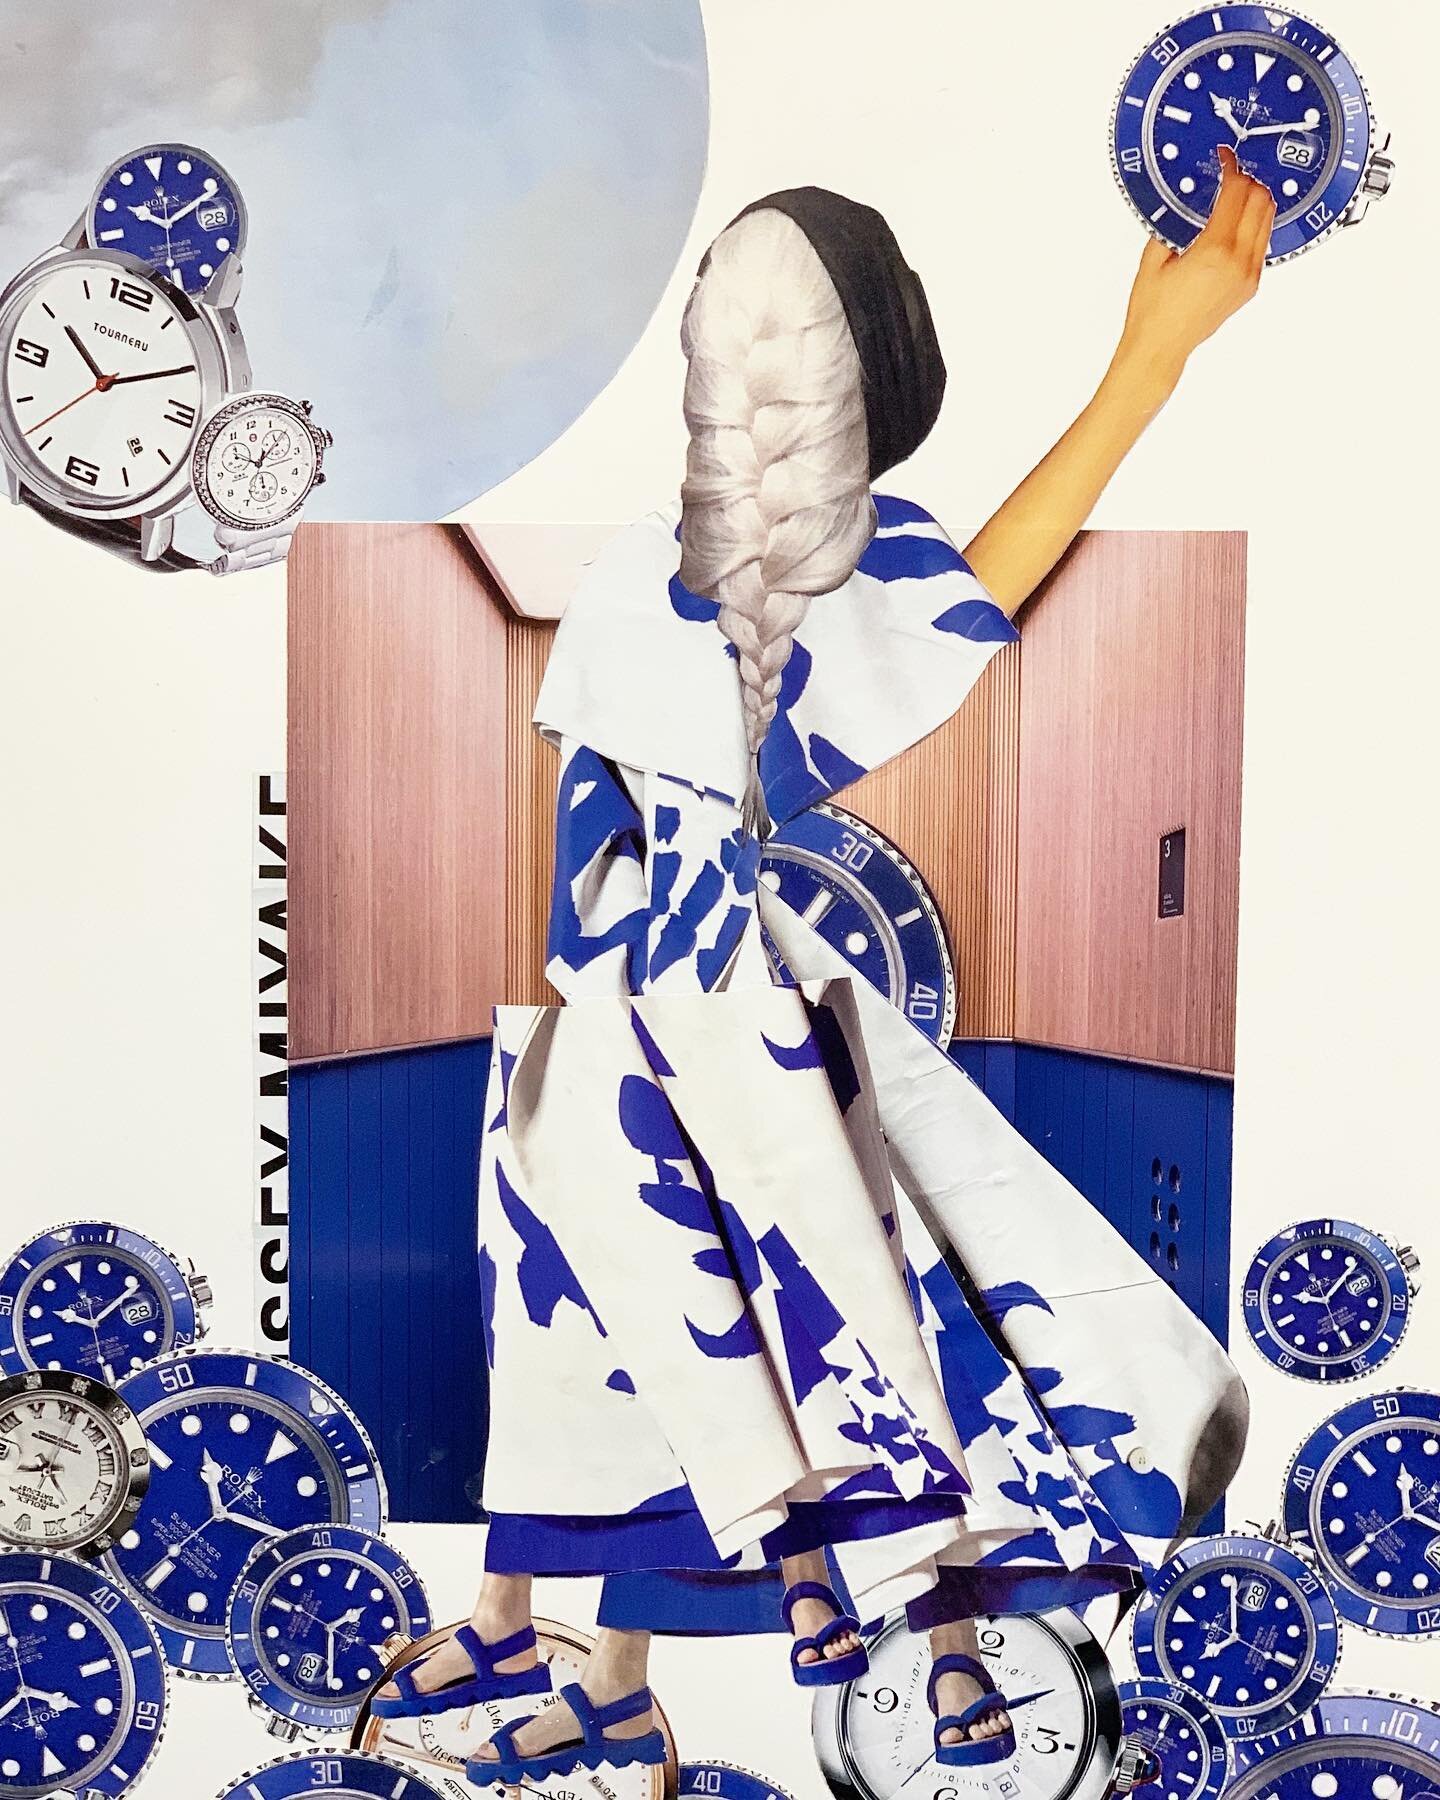 It&rsquo;s Blue Time

#collage
#collageart 
#collageartist 
#collageartwork
#photocollage 
#papercollage 
#cutandpastecollage 
#powertothepeople